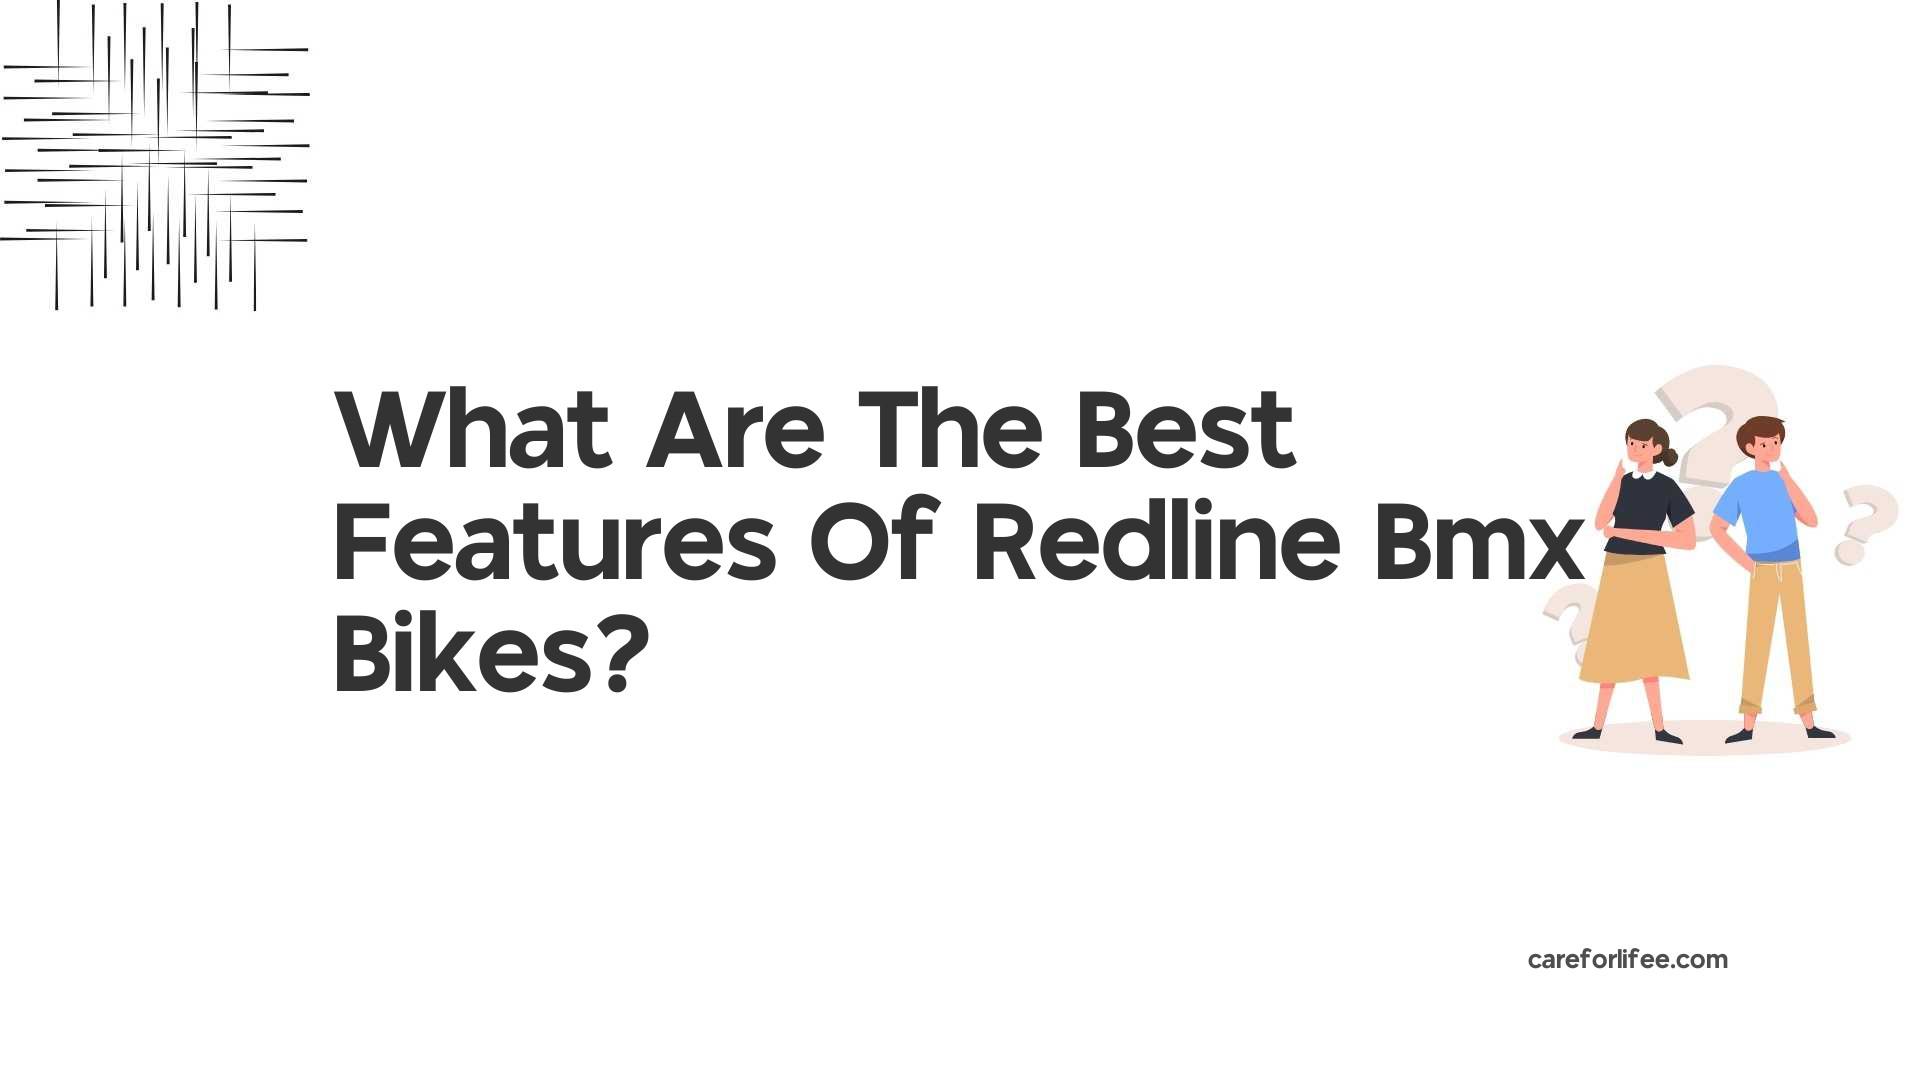 What Are The Best Features Of Redline Bmx Bikes?